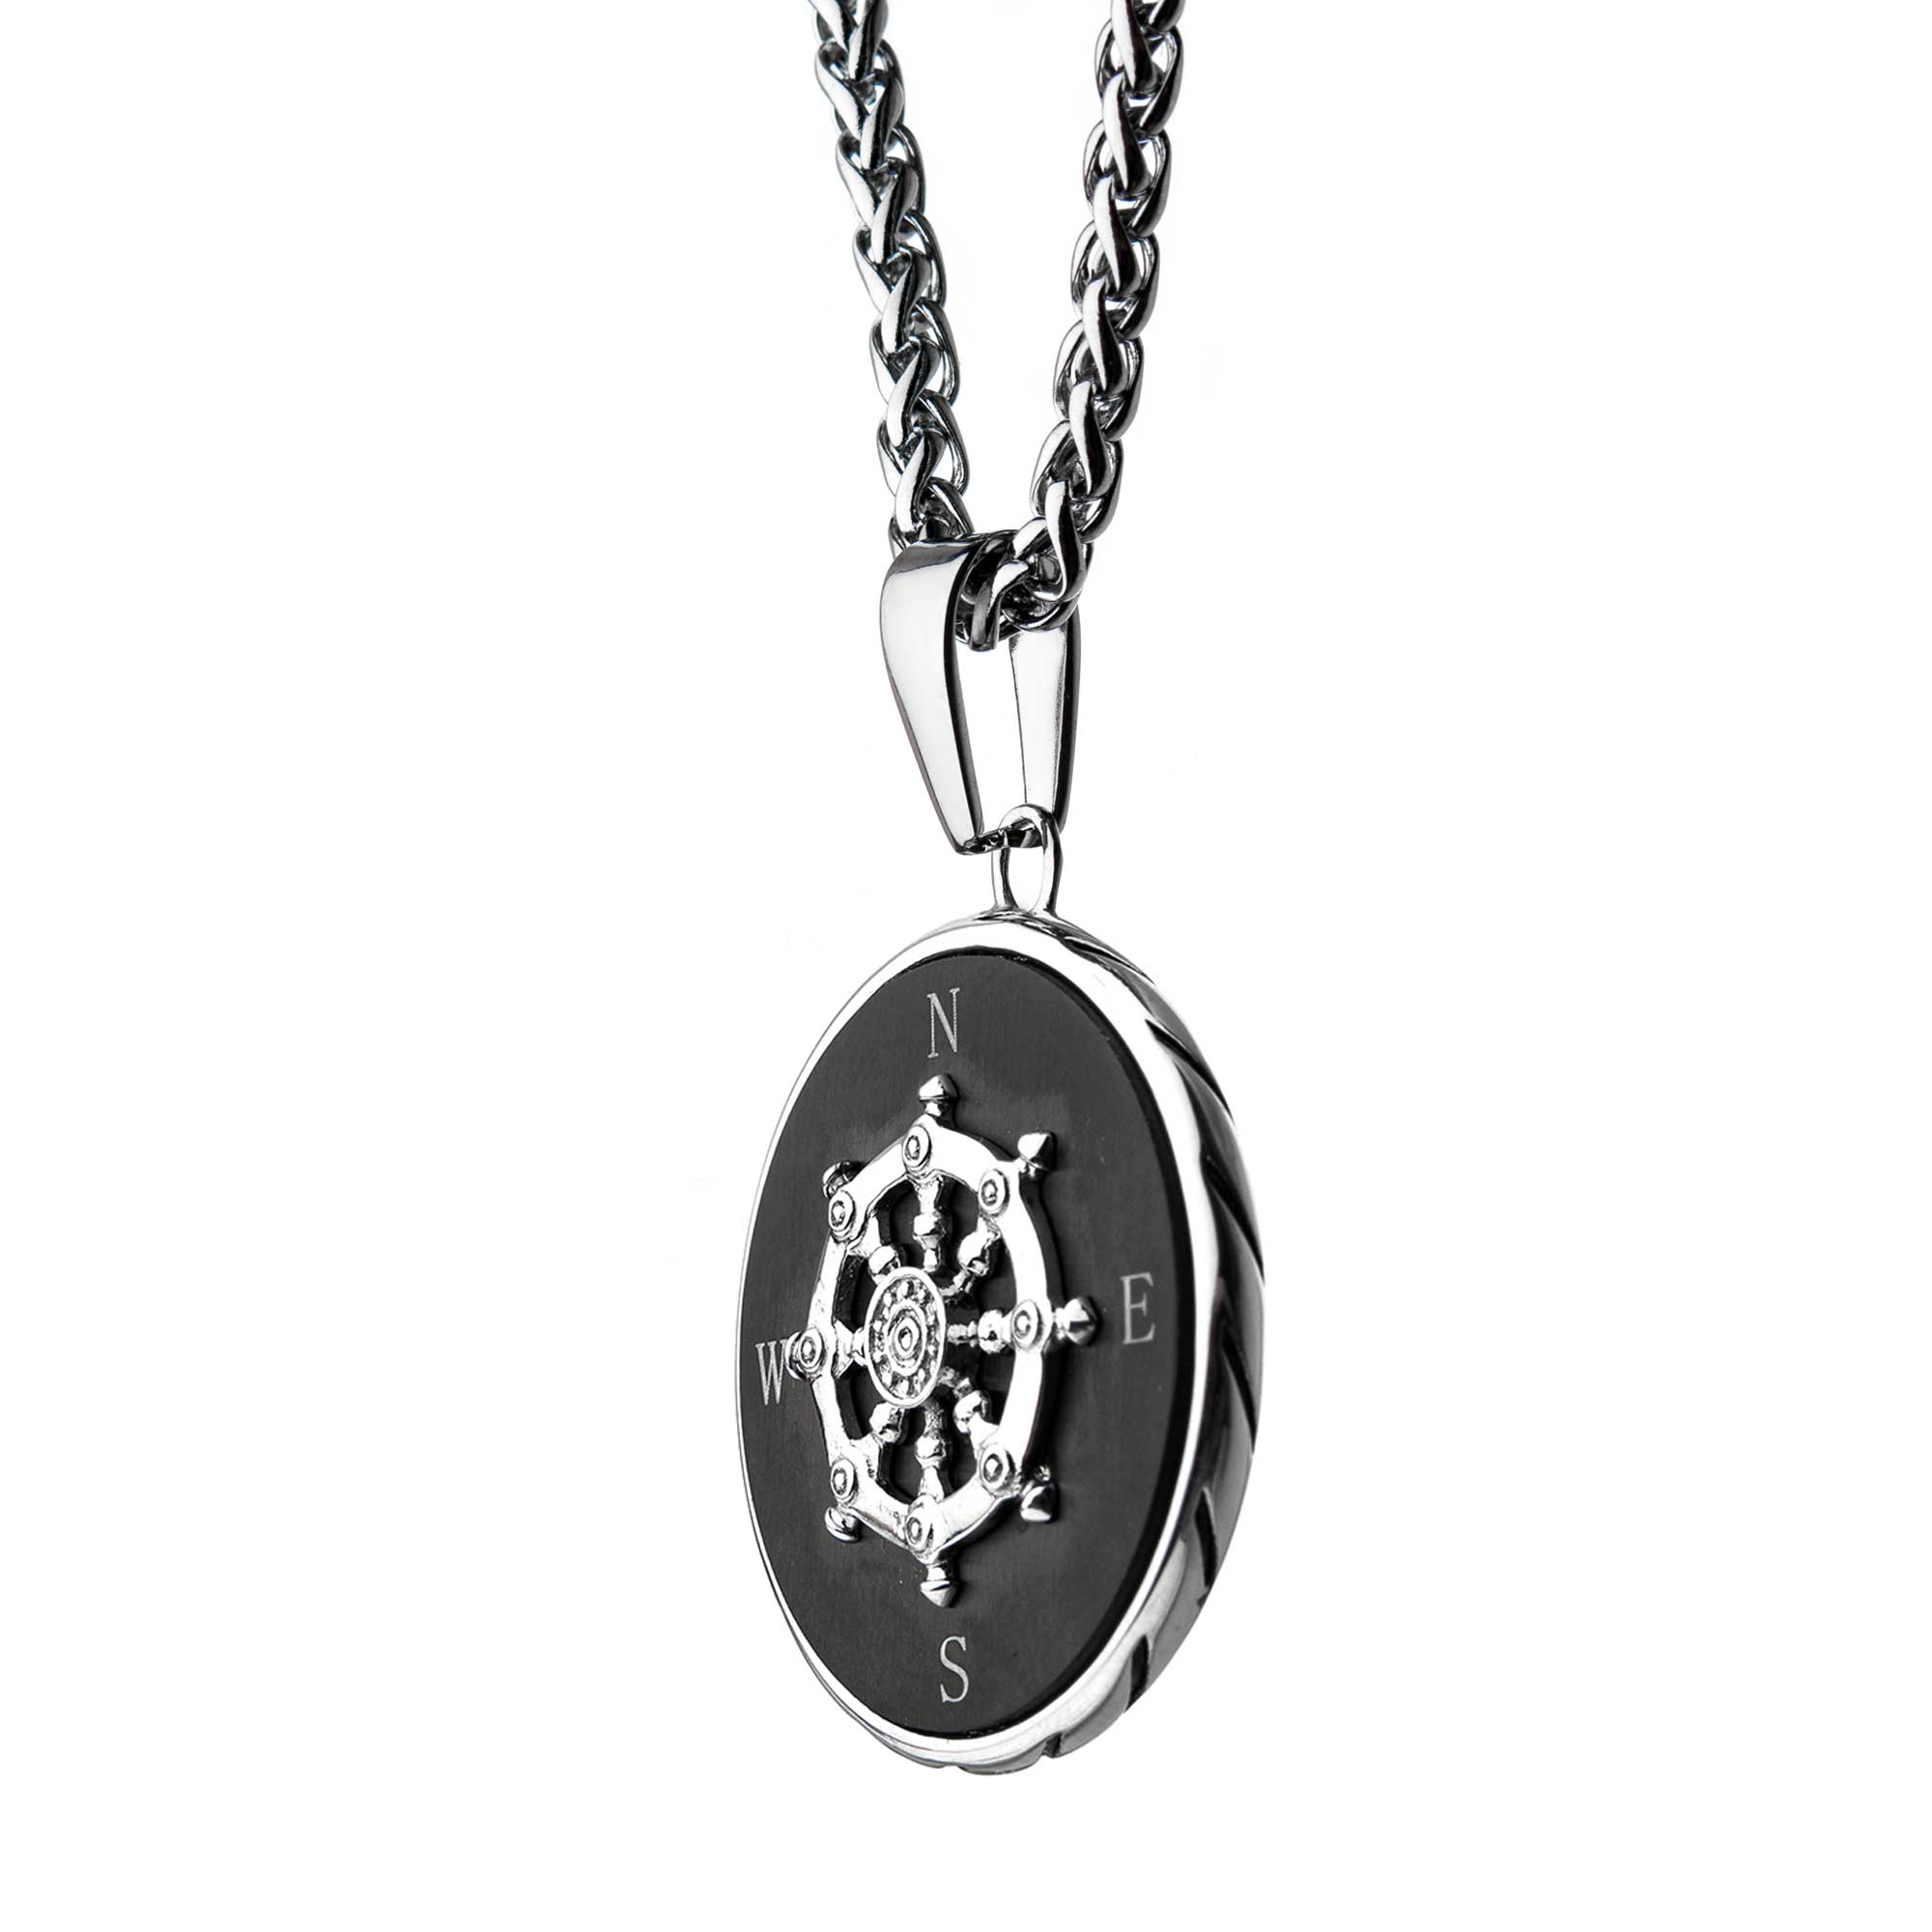 Stainless Steel Black Plated Ship's Wheel Compass Pendant with Chain Image 3 Milano Jewelers Pembroke Pines, FL